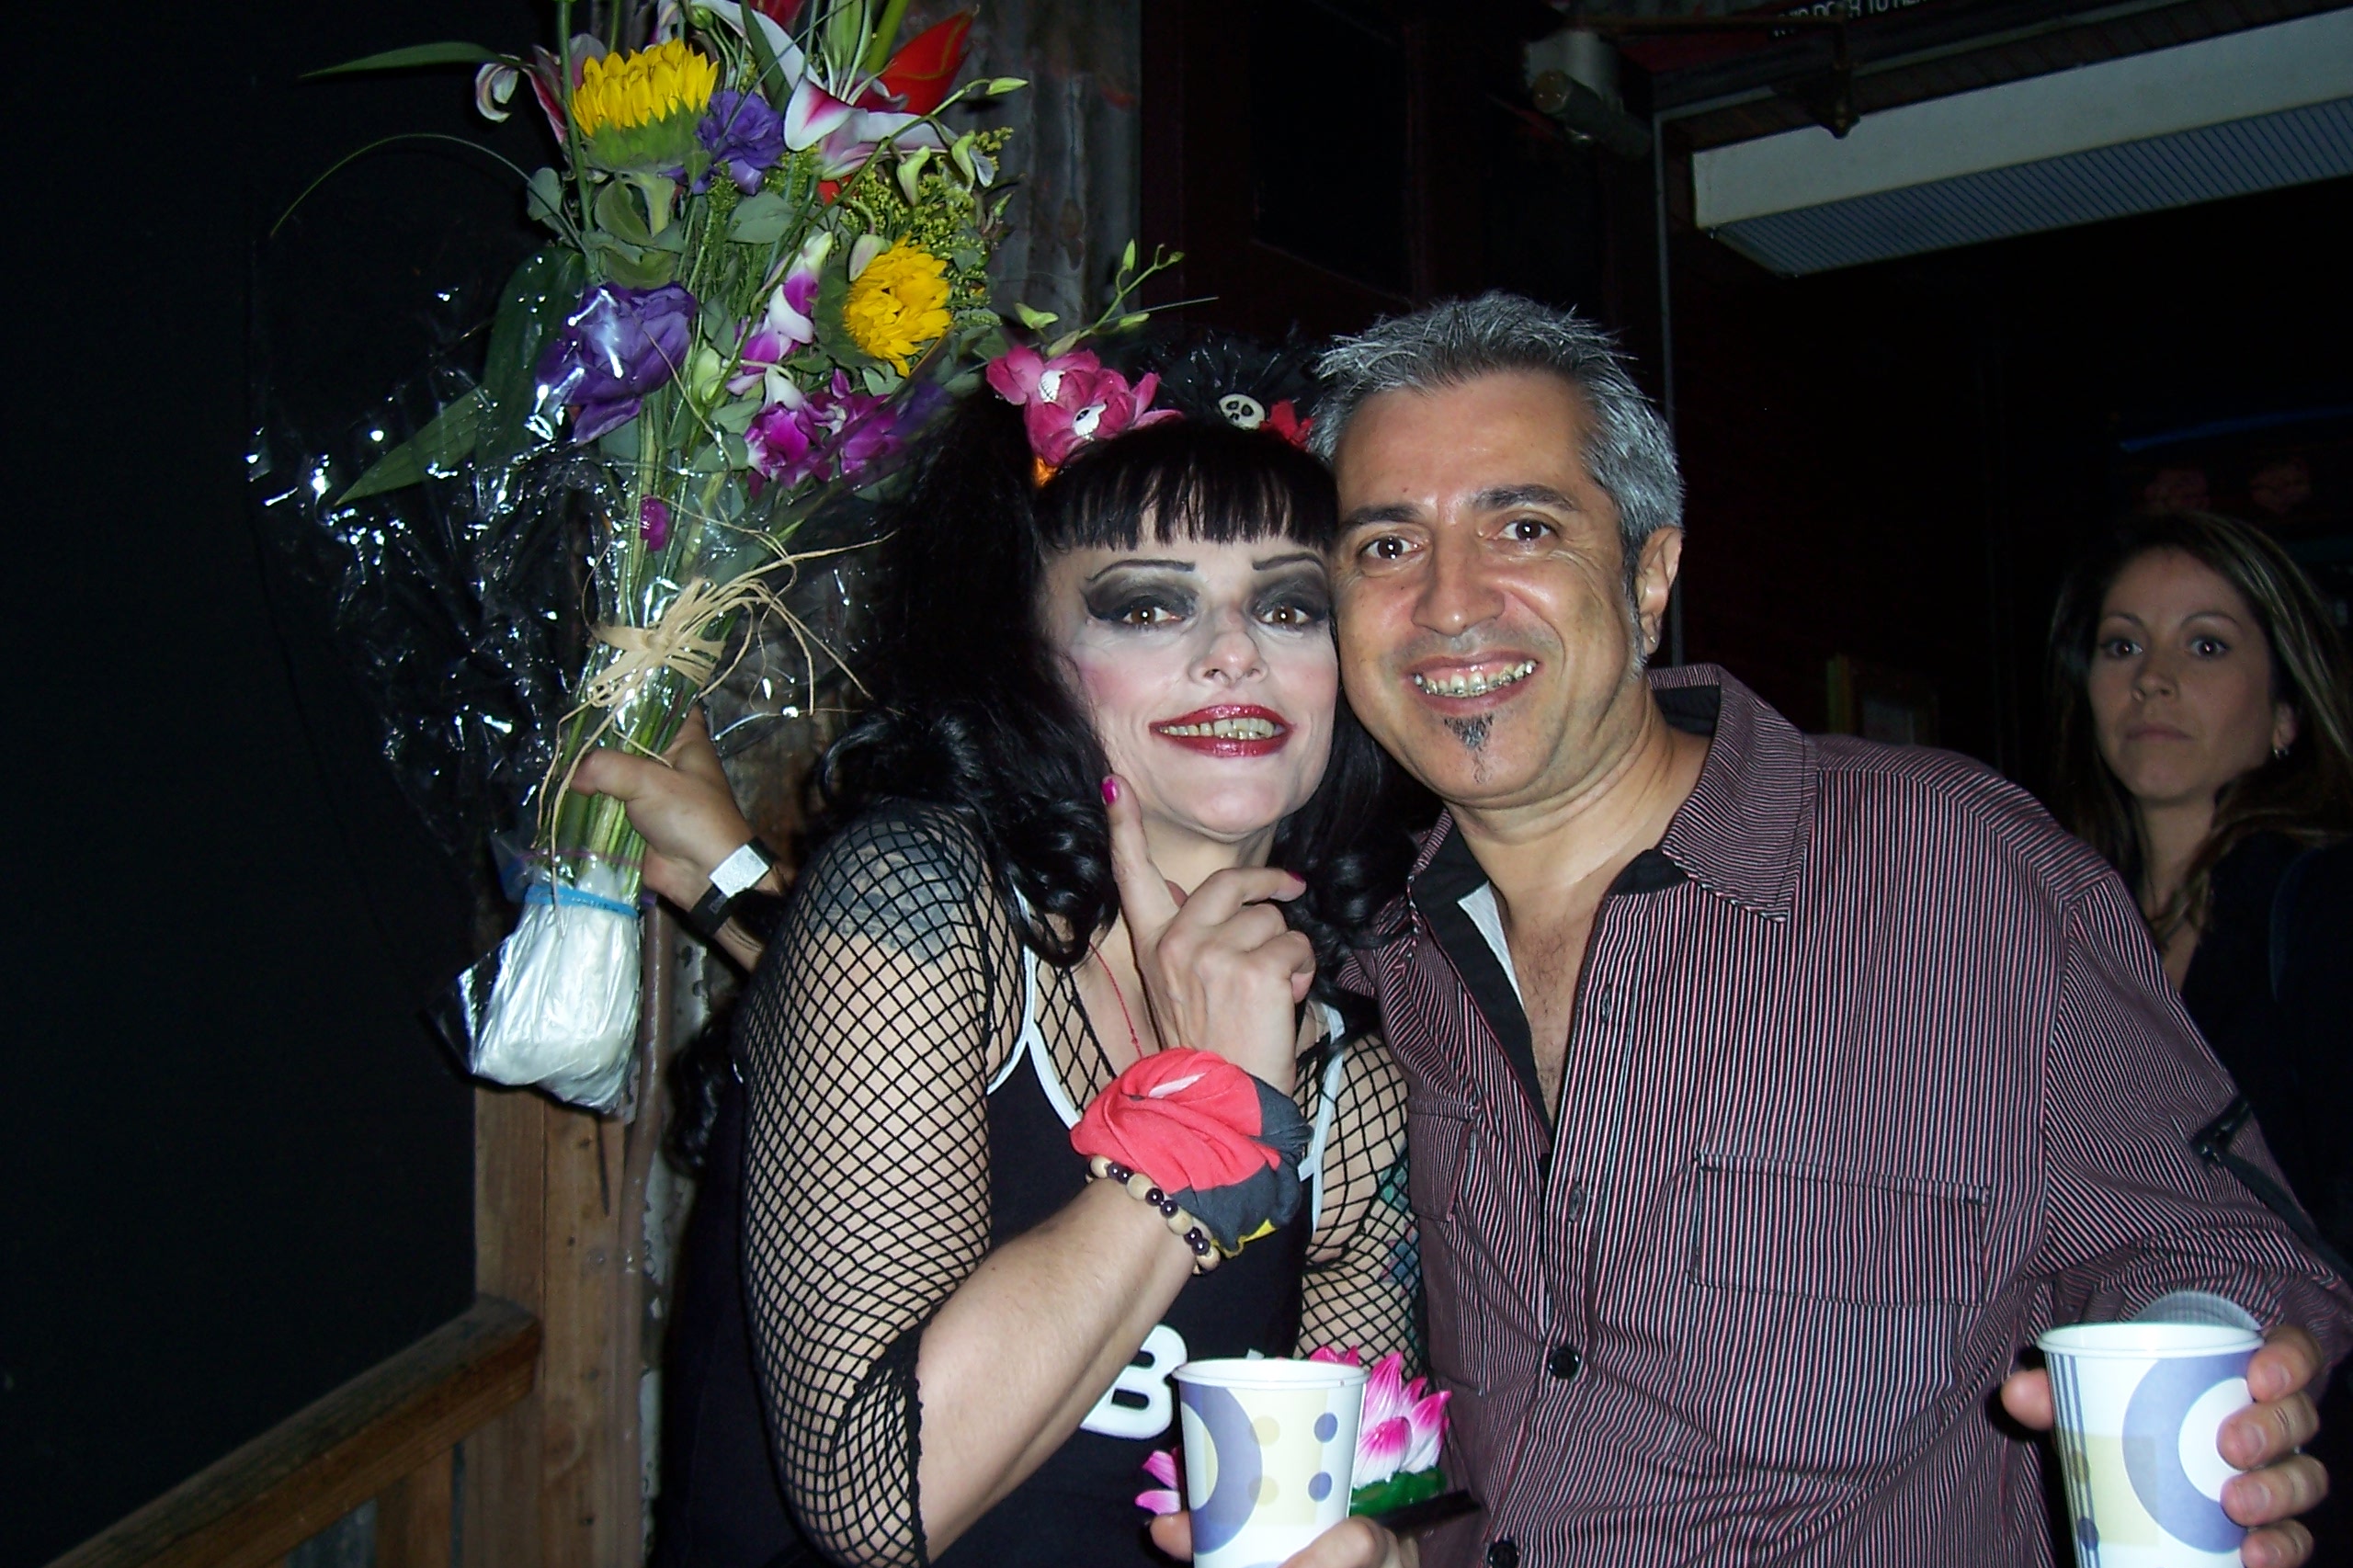 Actress/Singer Nina Hagen and Producer/Director Boris Acosta at the House of Blues in Los Angeles, USA.